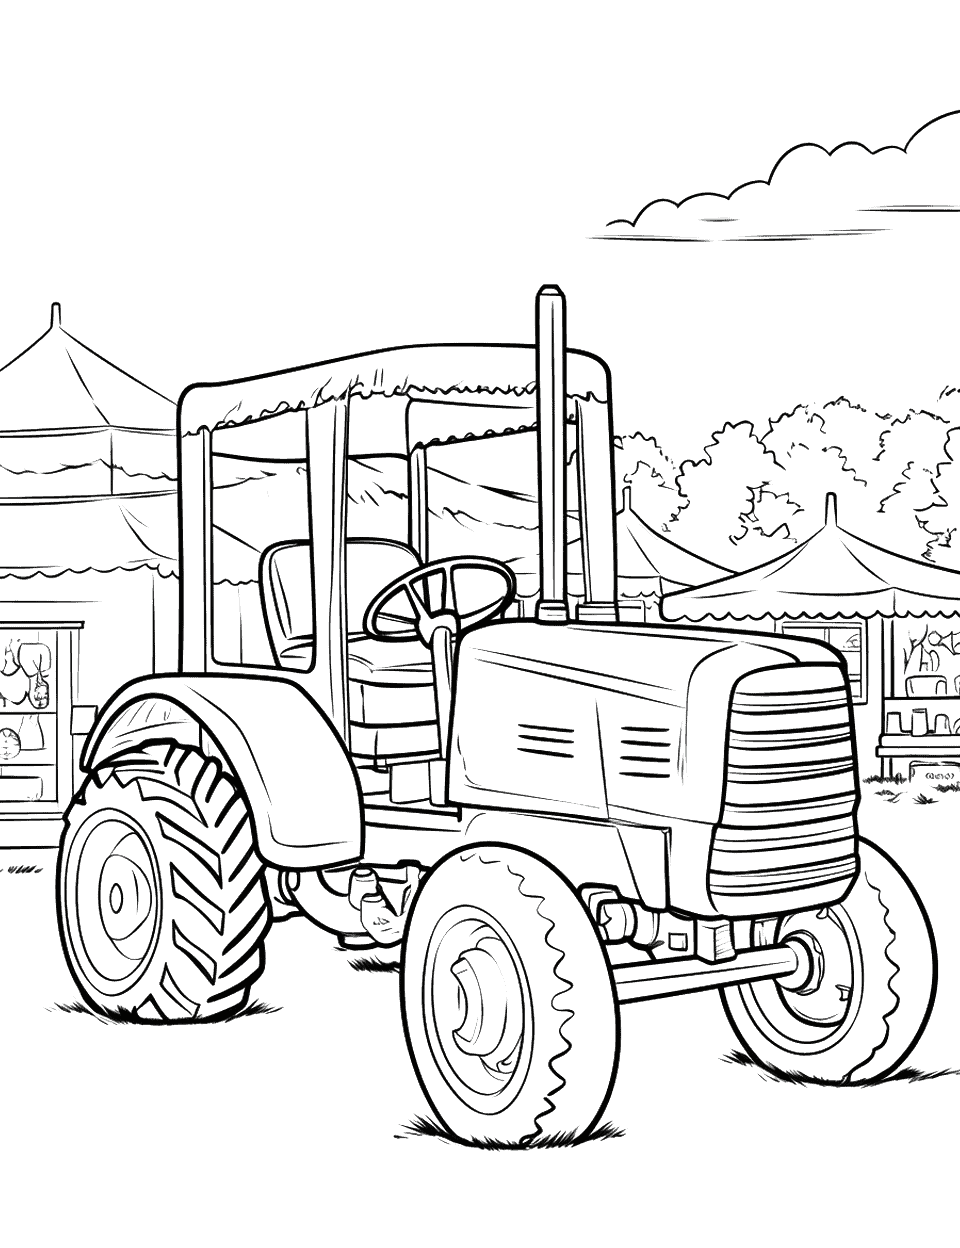 Tractor at the County Fair Coloring Page - A scene depicting a tractor on display at a bustling county fair.